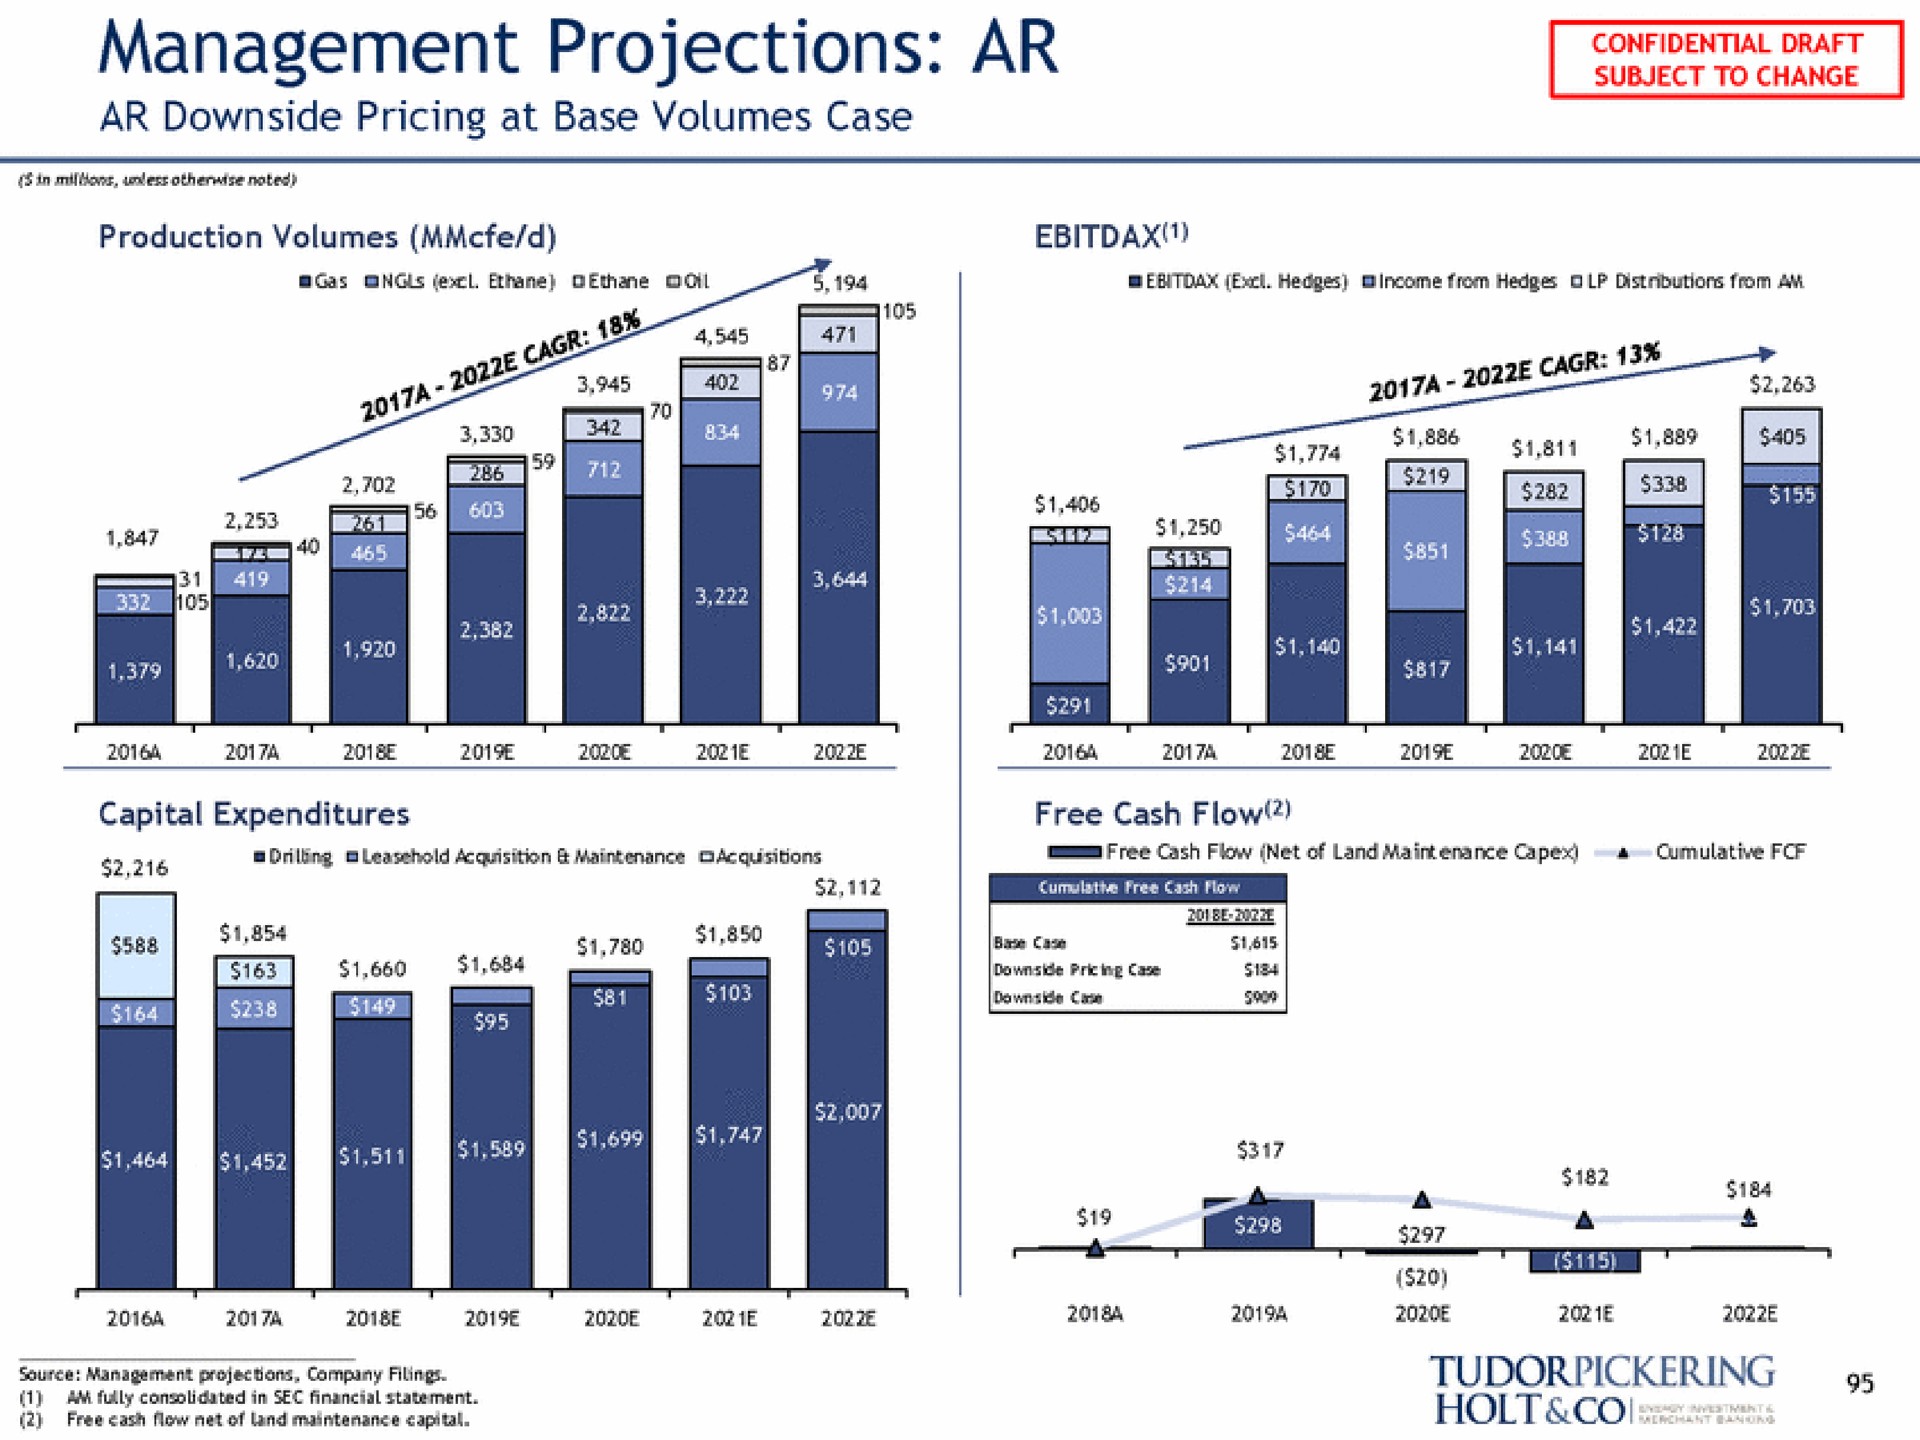 management projections downside pricing at base volumes case source management projections company flings | Tudor, Pickering, Holt & Co